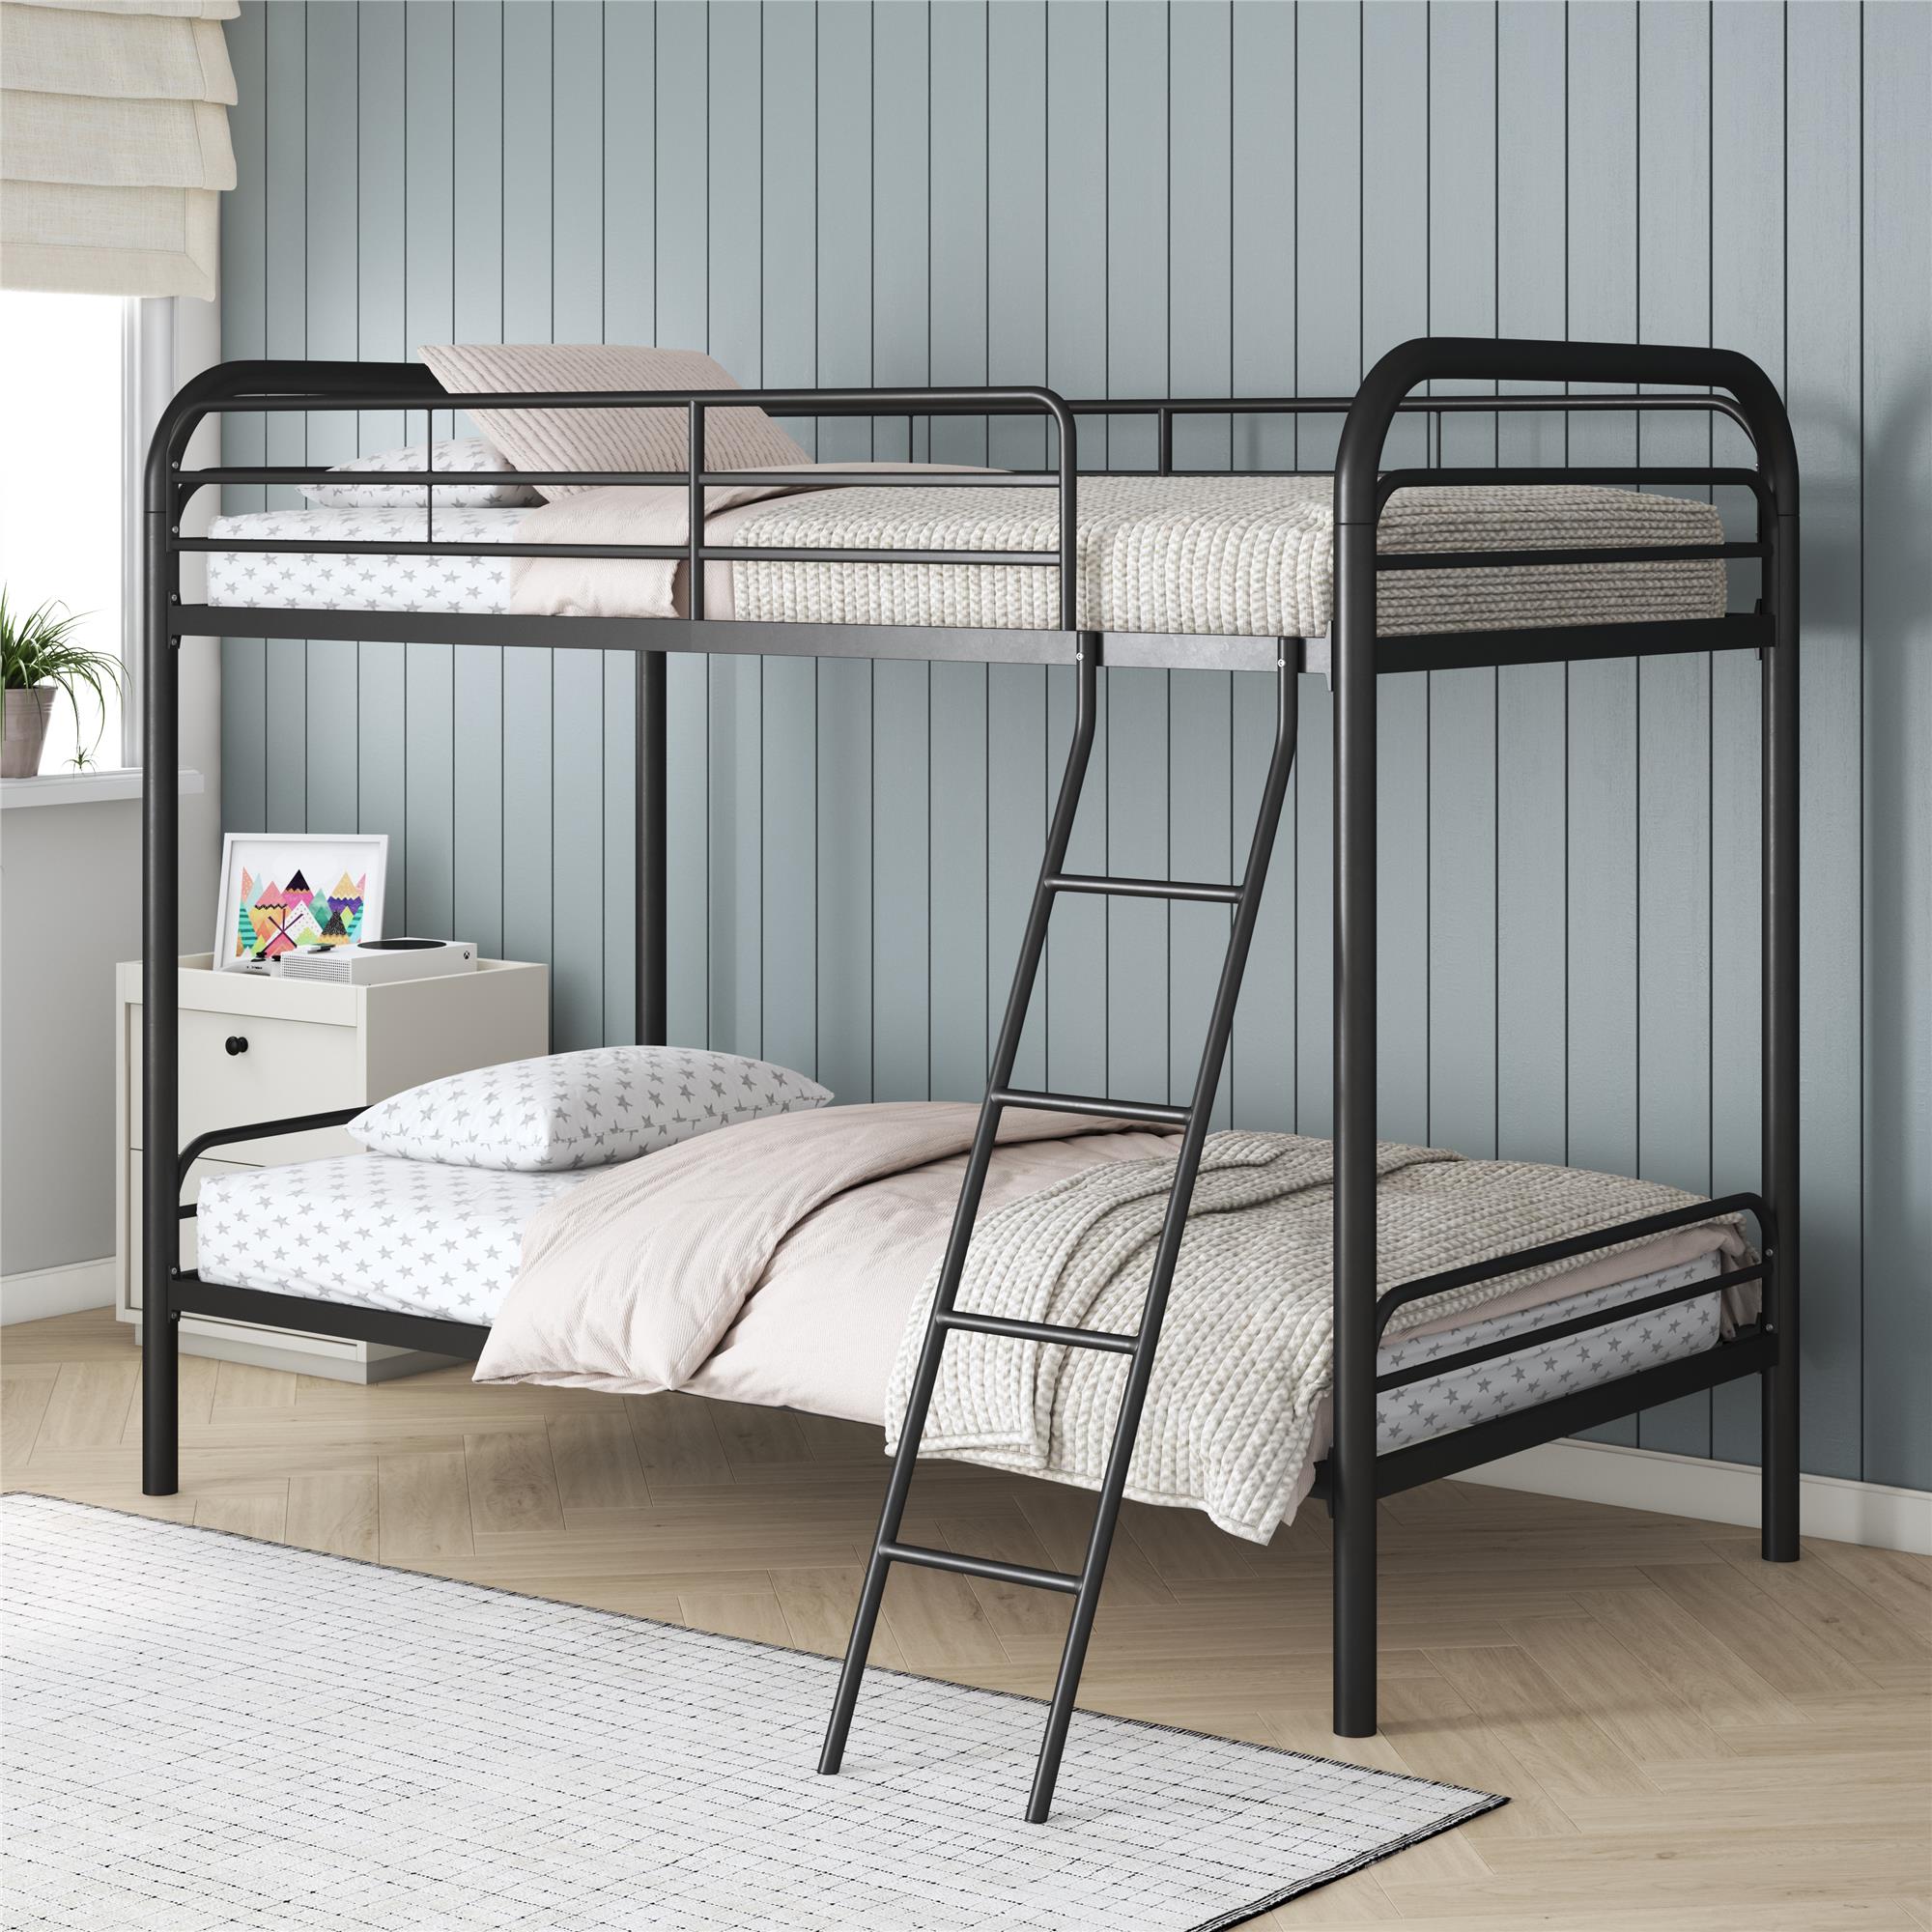 DHP Dusty Twin over Twin Metal Bunk Bed with Secured Ladder, Black - image 2 of 9